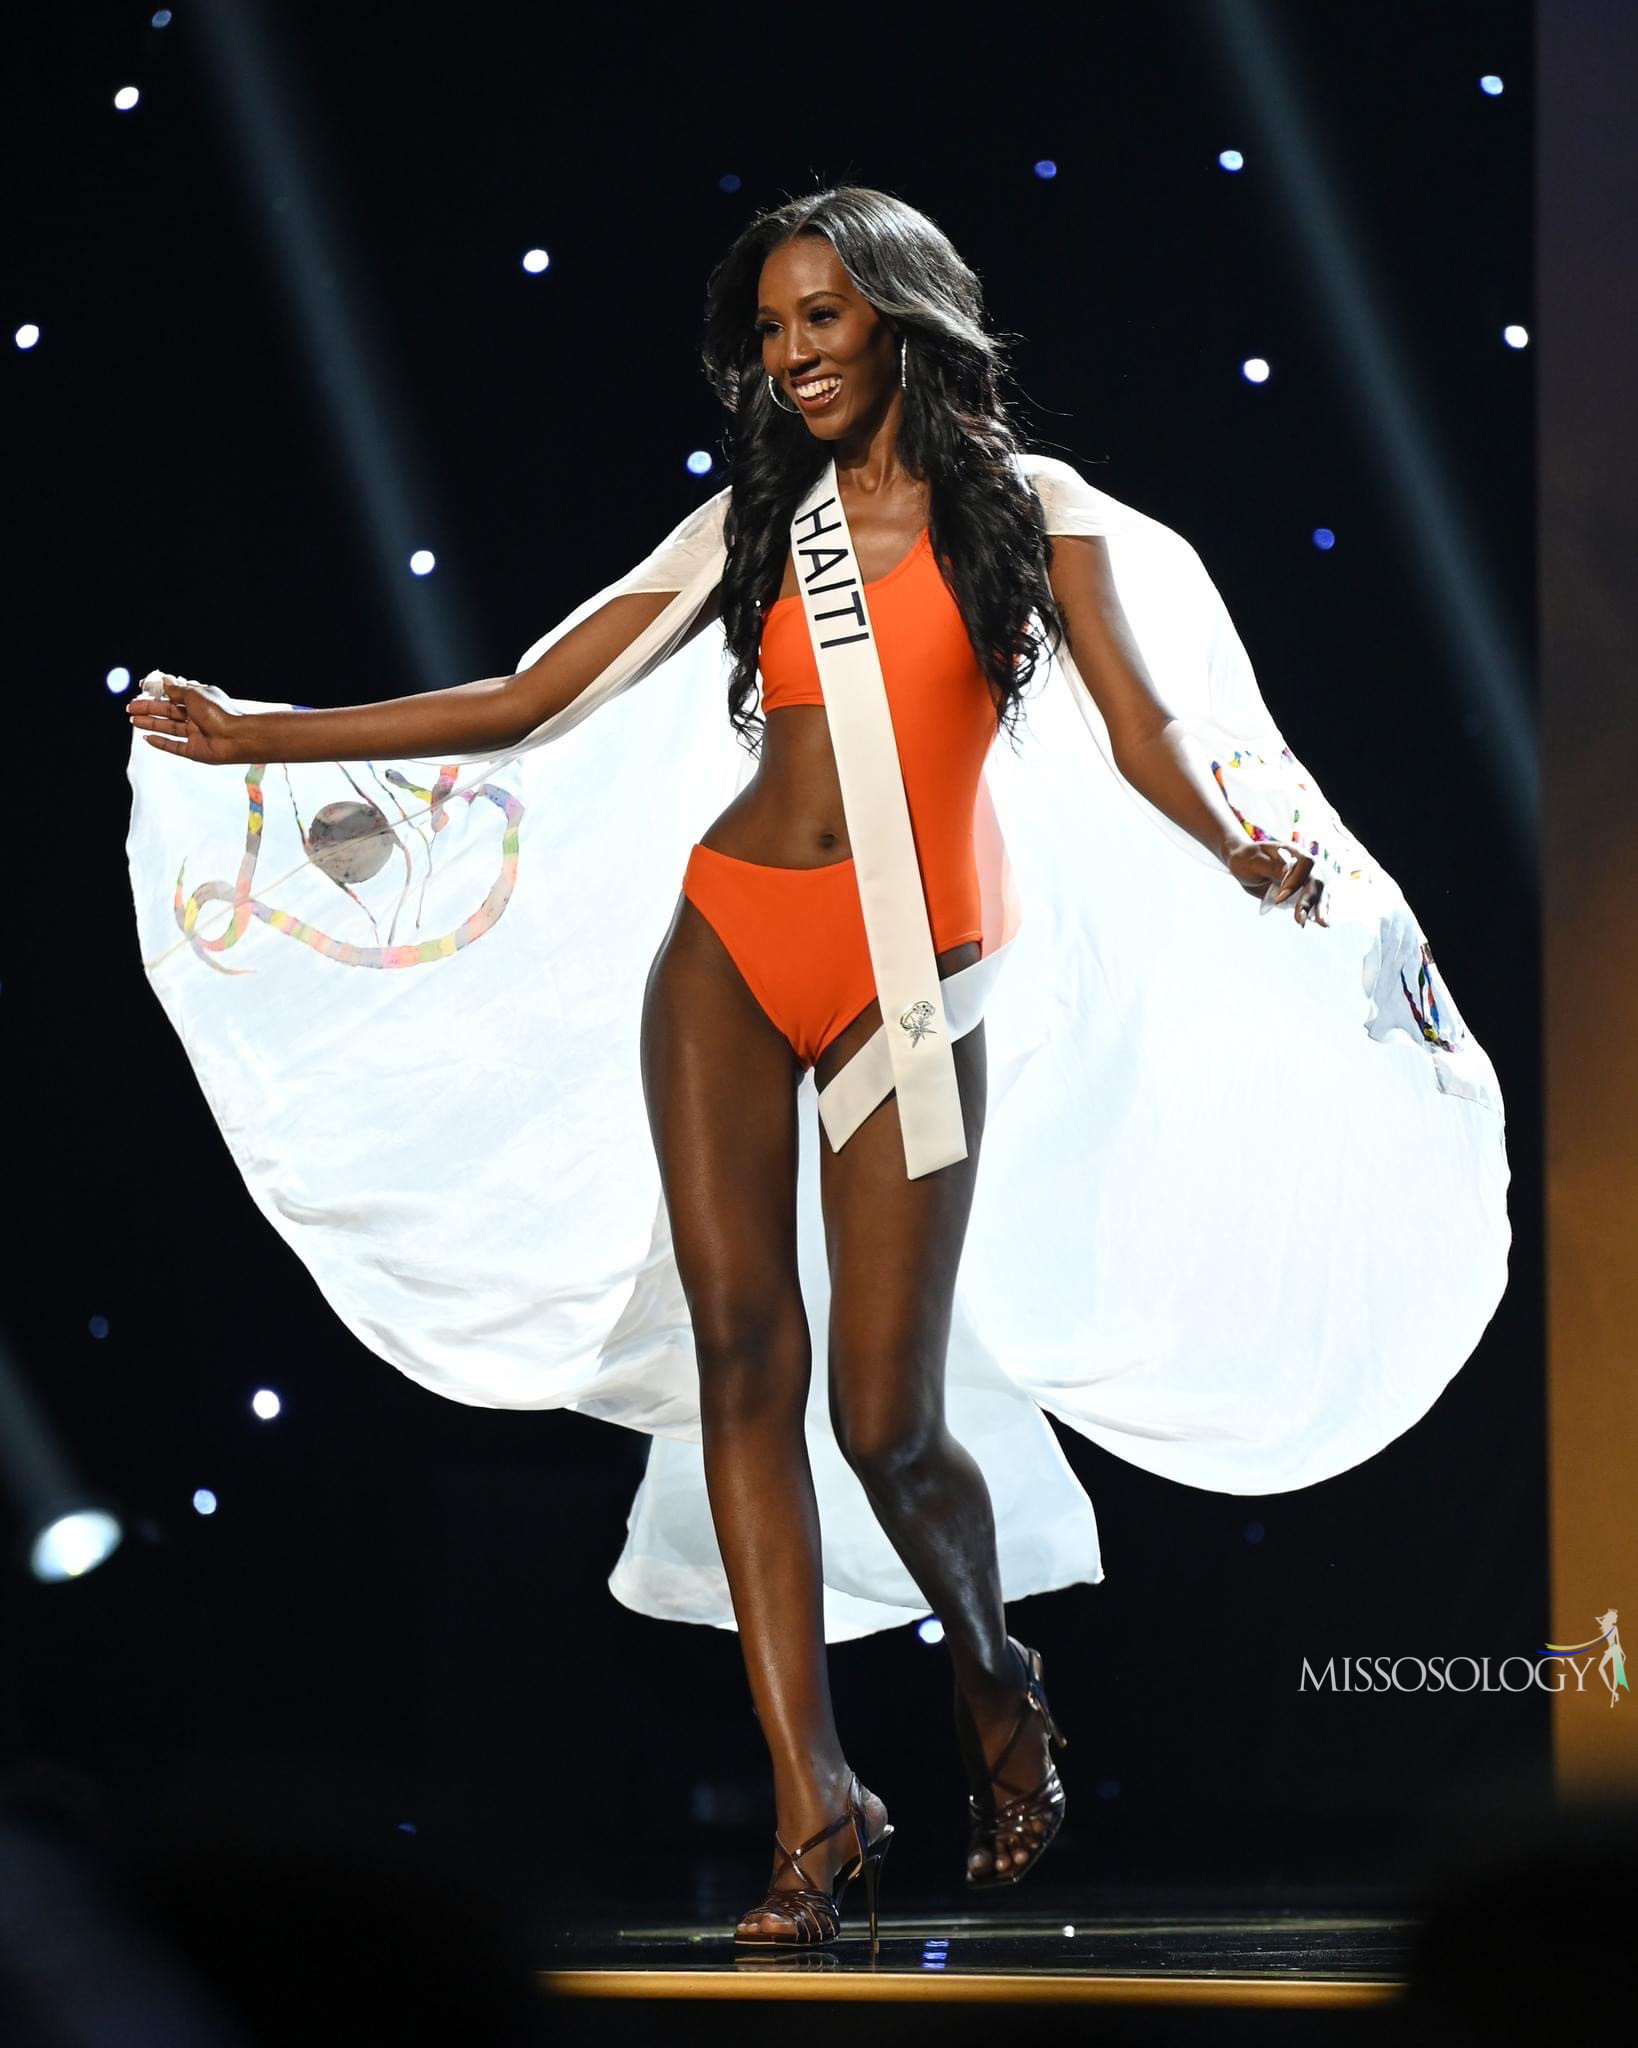 71st MISS UNIVERSE Preliminary Competition  - Página 3 HYA3cue